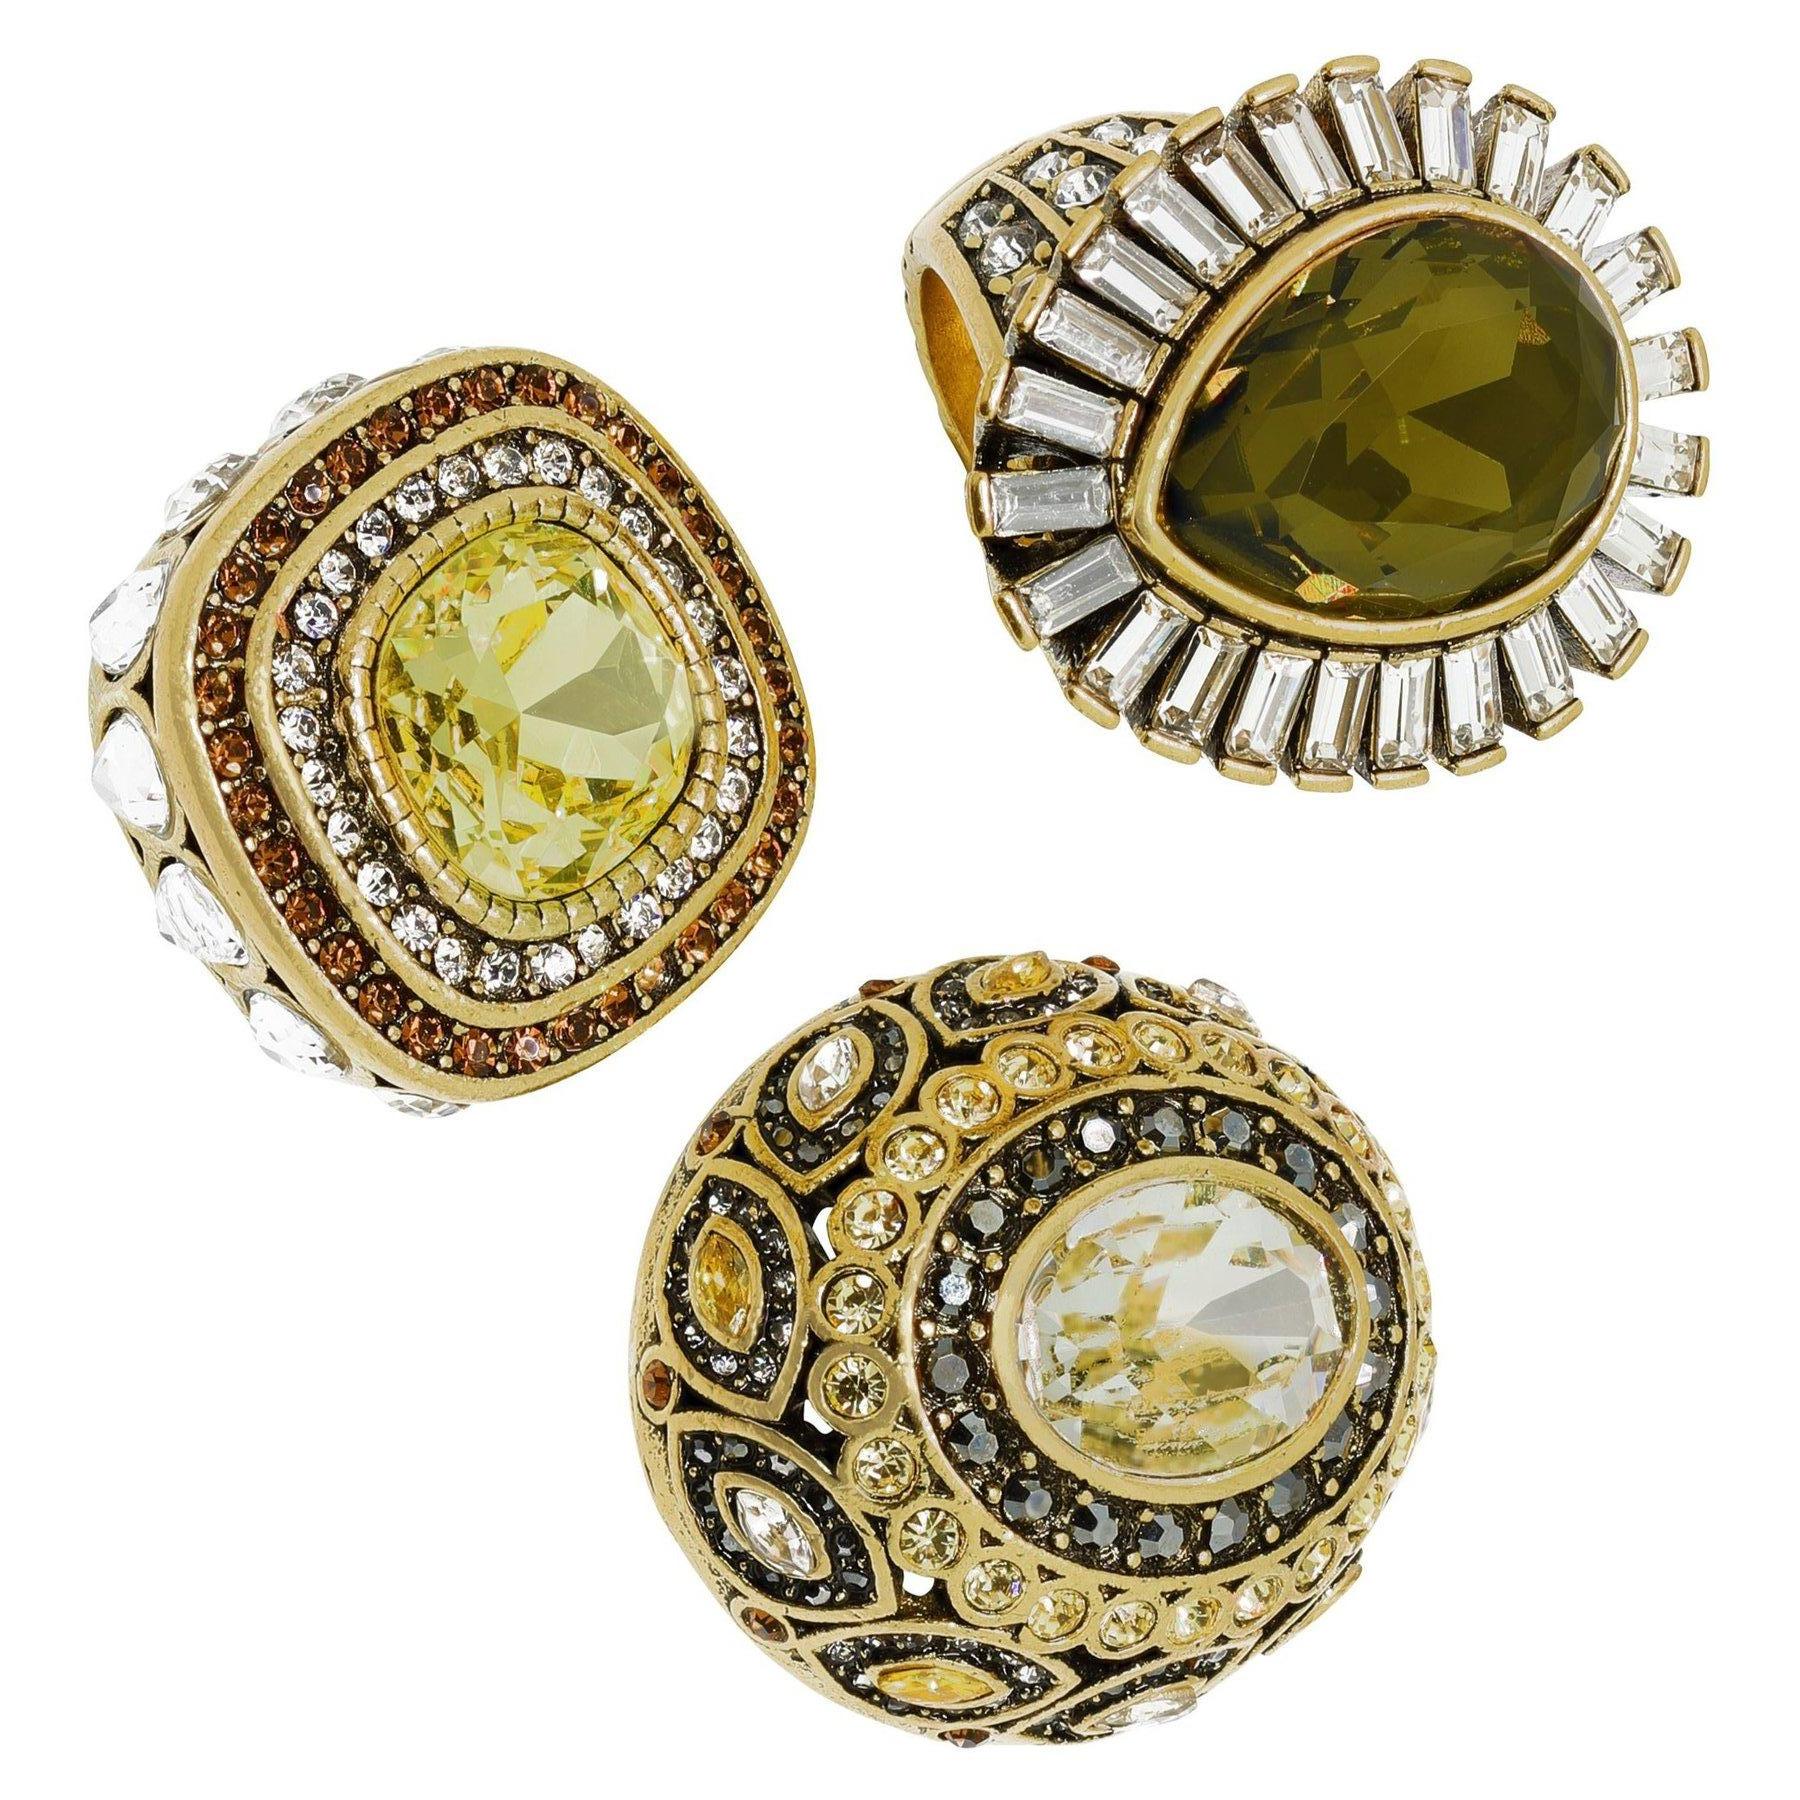 Heidi Daus Enchante Magnetic Ring Set of 3 Size 8 GOLD VERSION

Inspired by the self expression & opulence of the art deco era, Heidi's best selling 